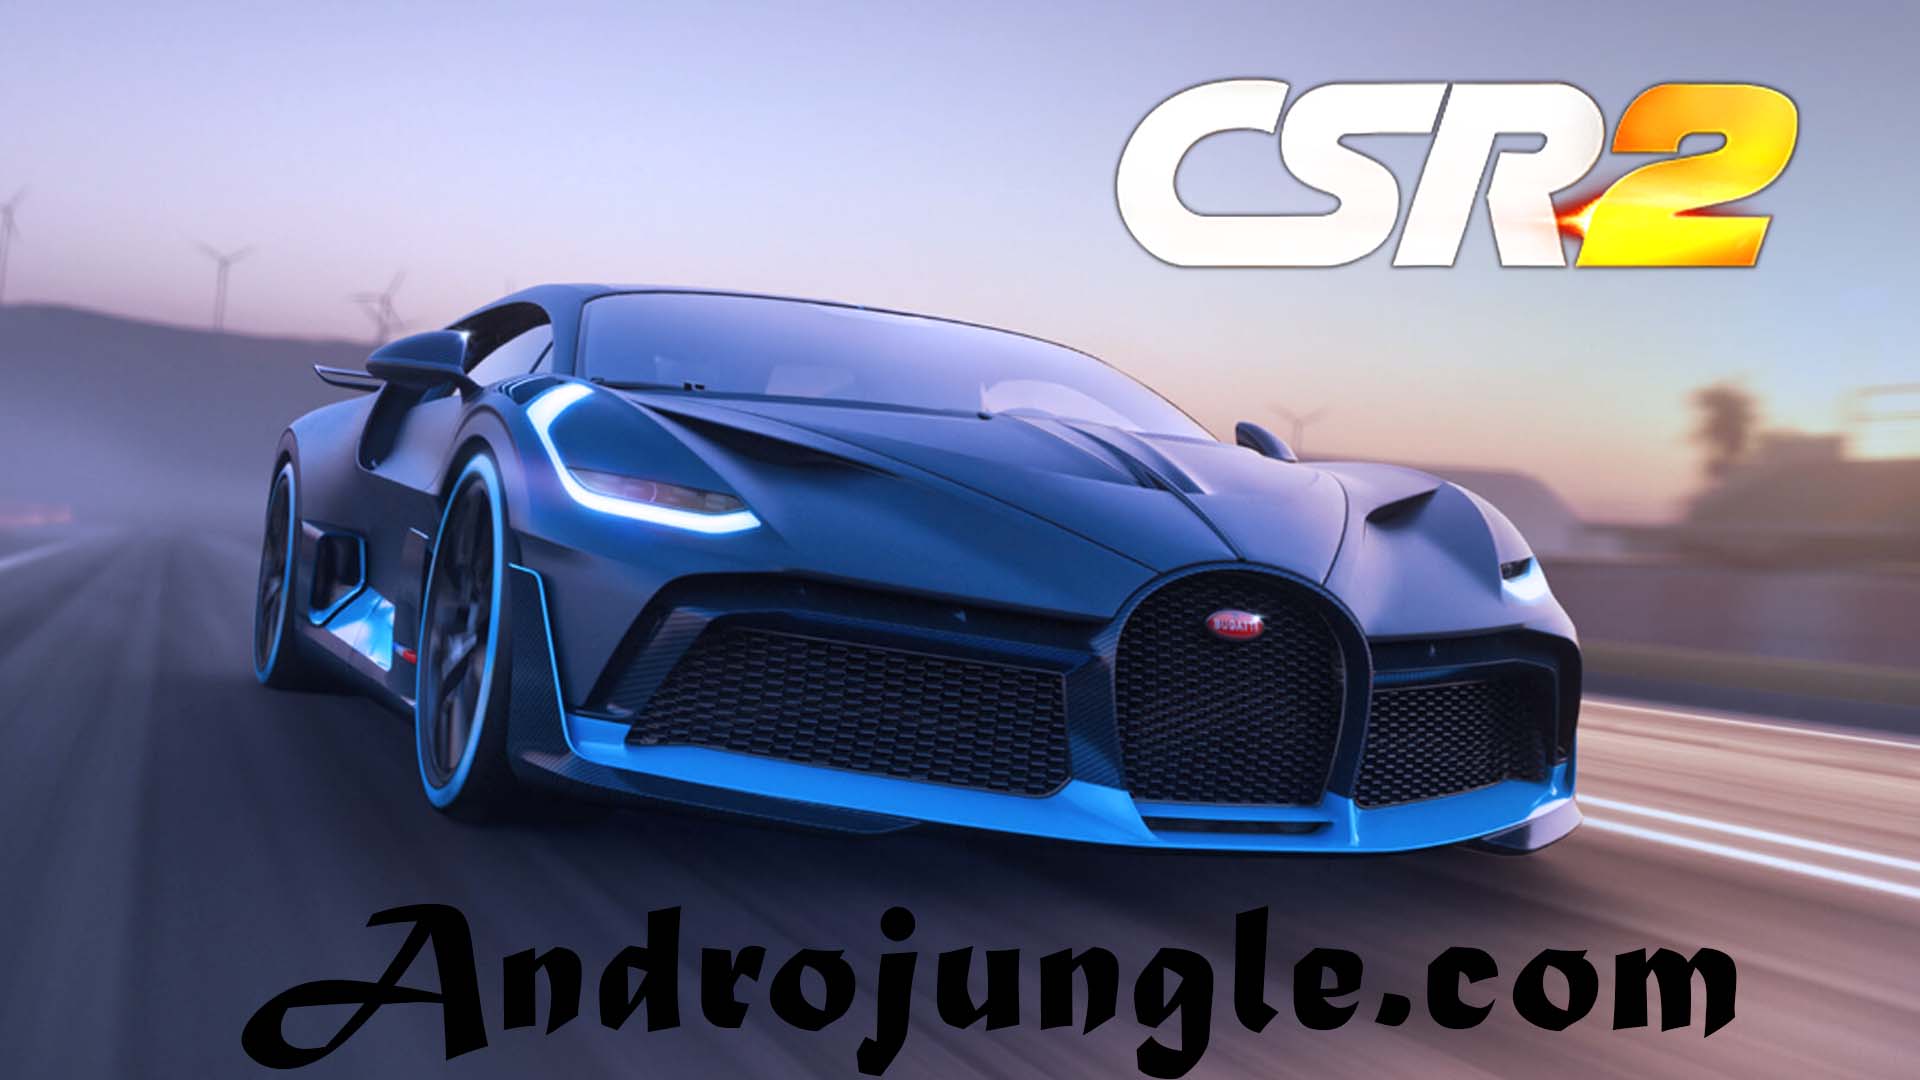 csr racing 2 mod apk unlimited money and gold and keys